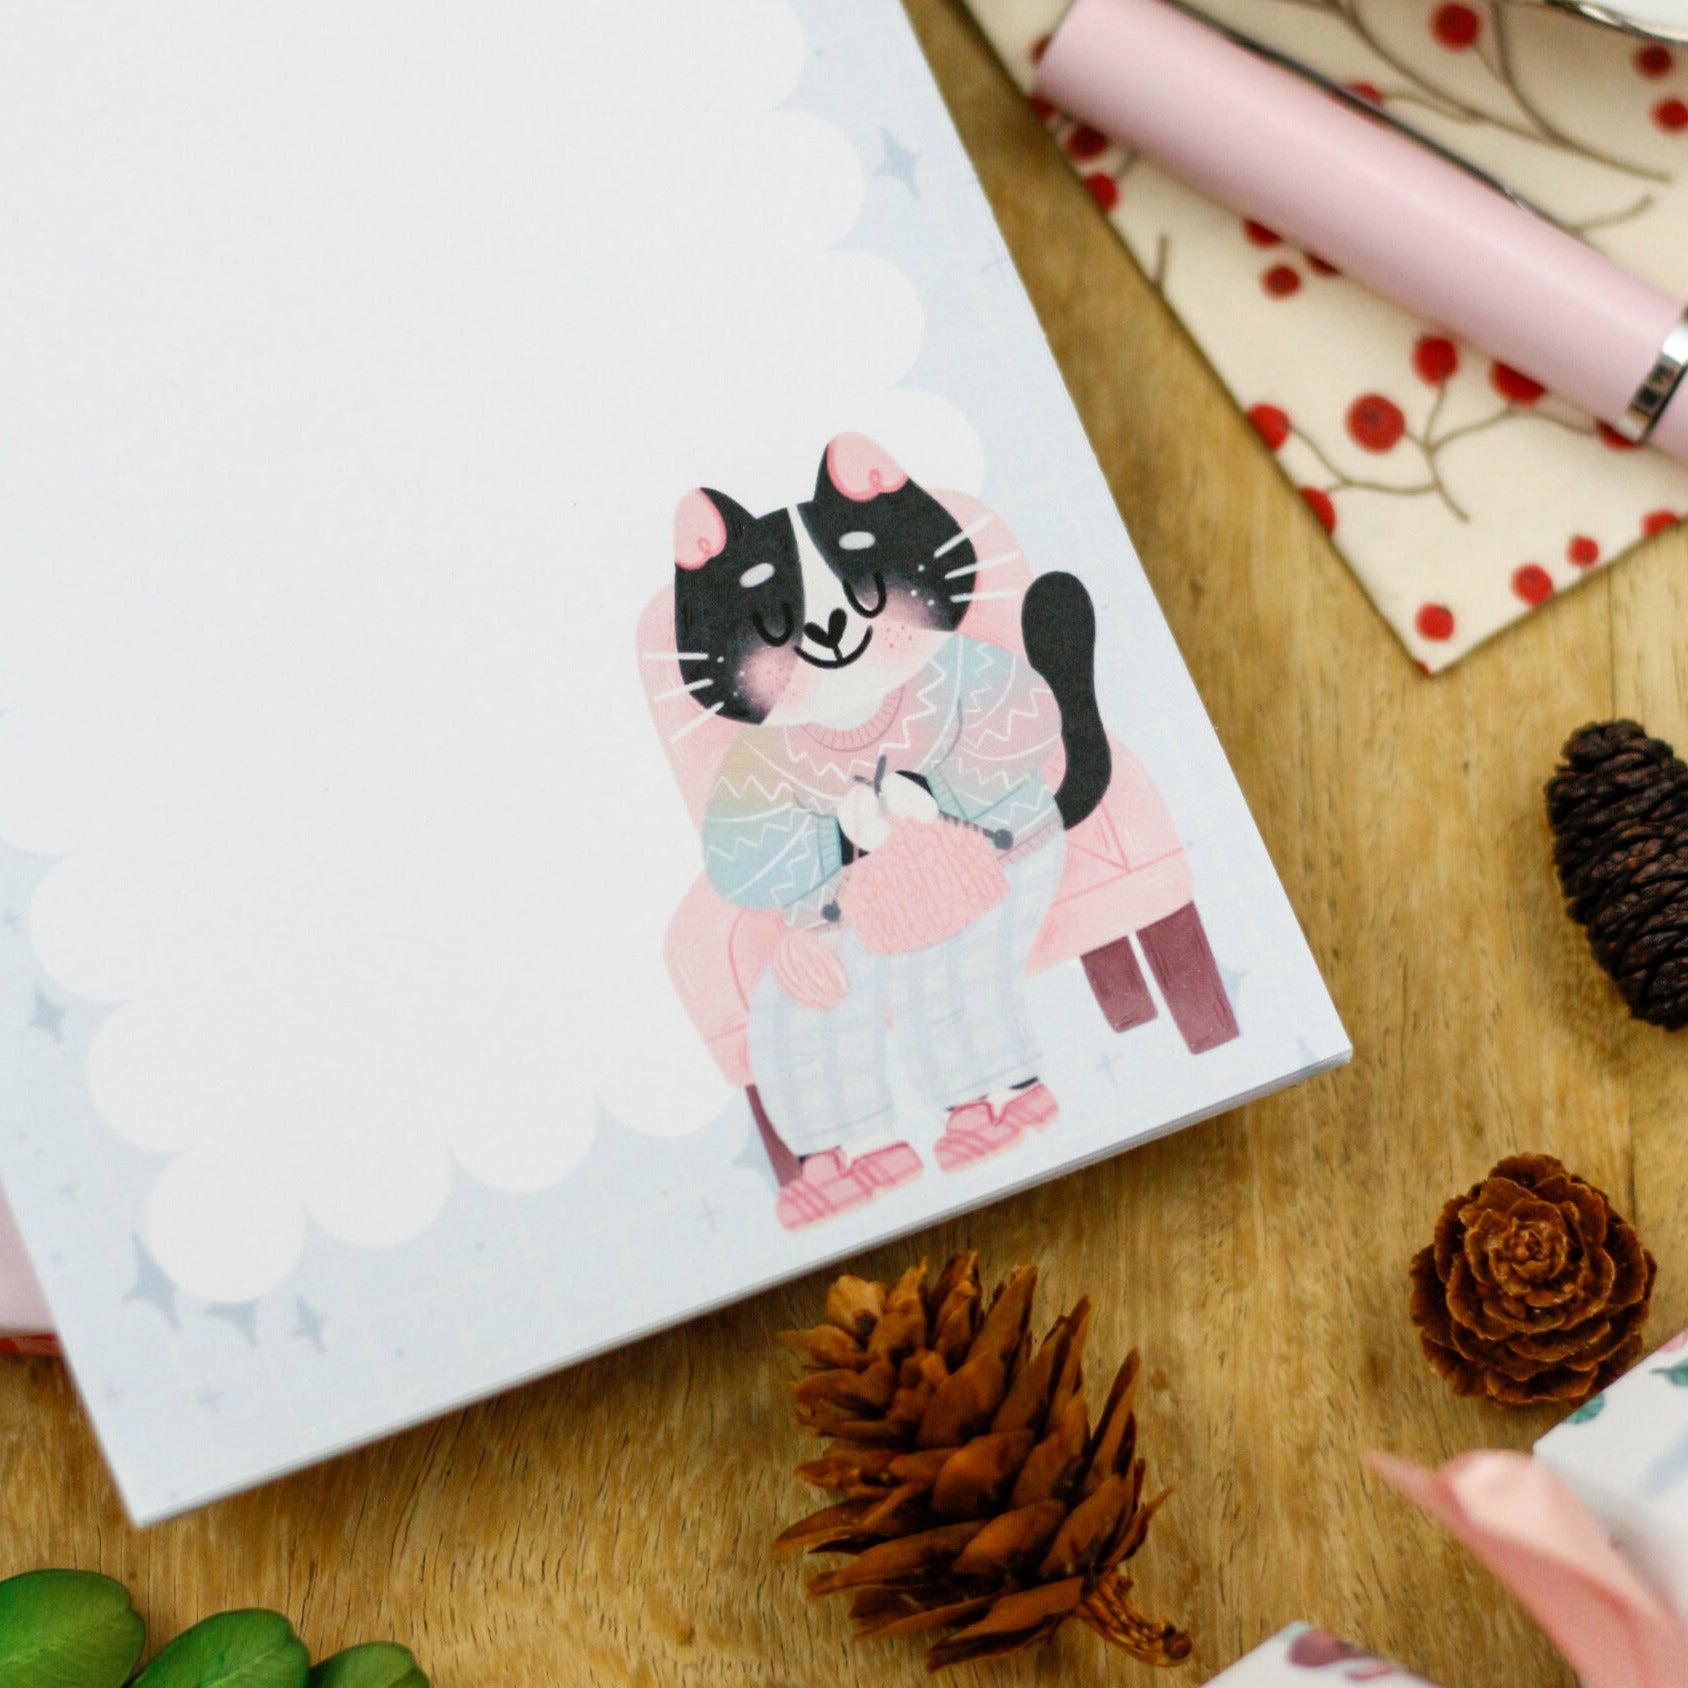 knitting notepad with cute cat